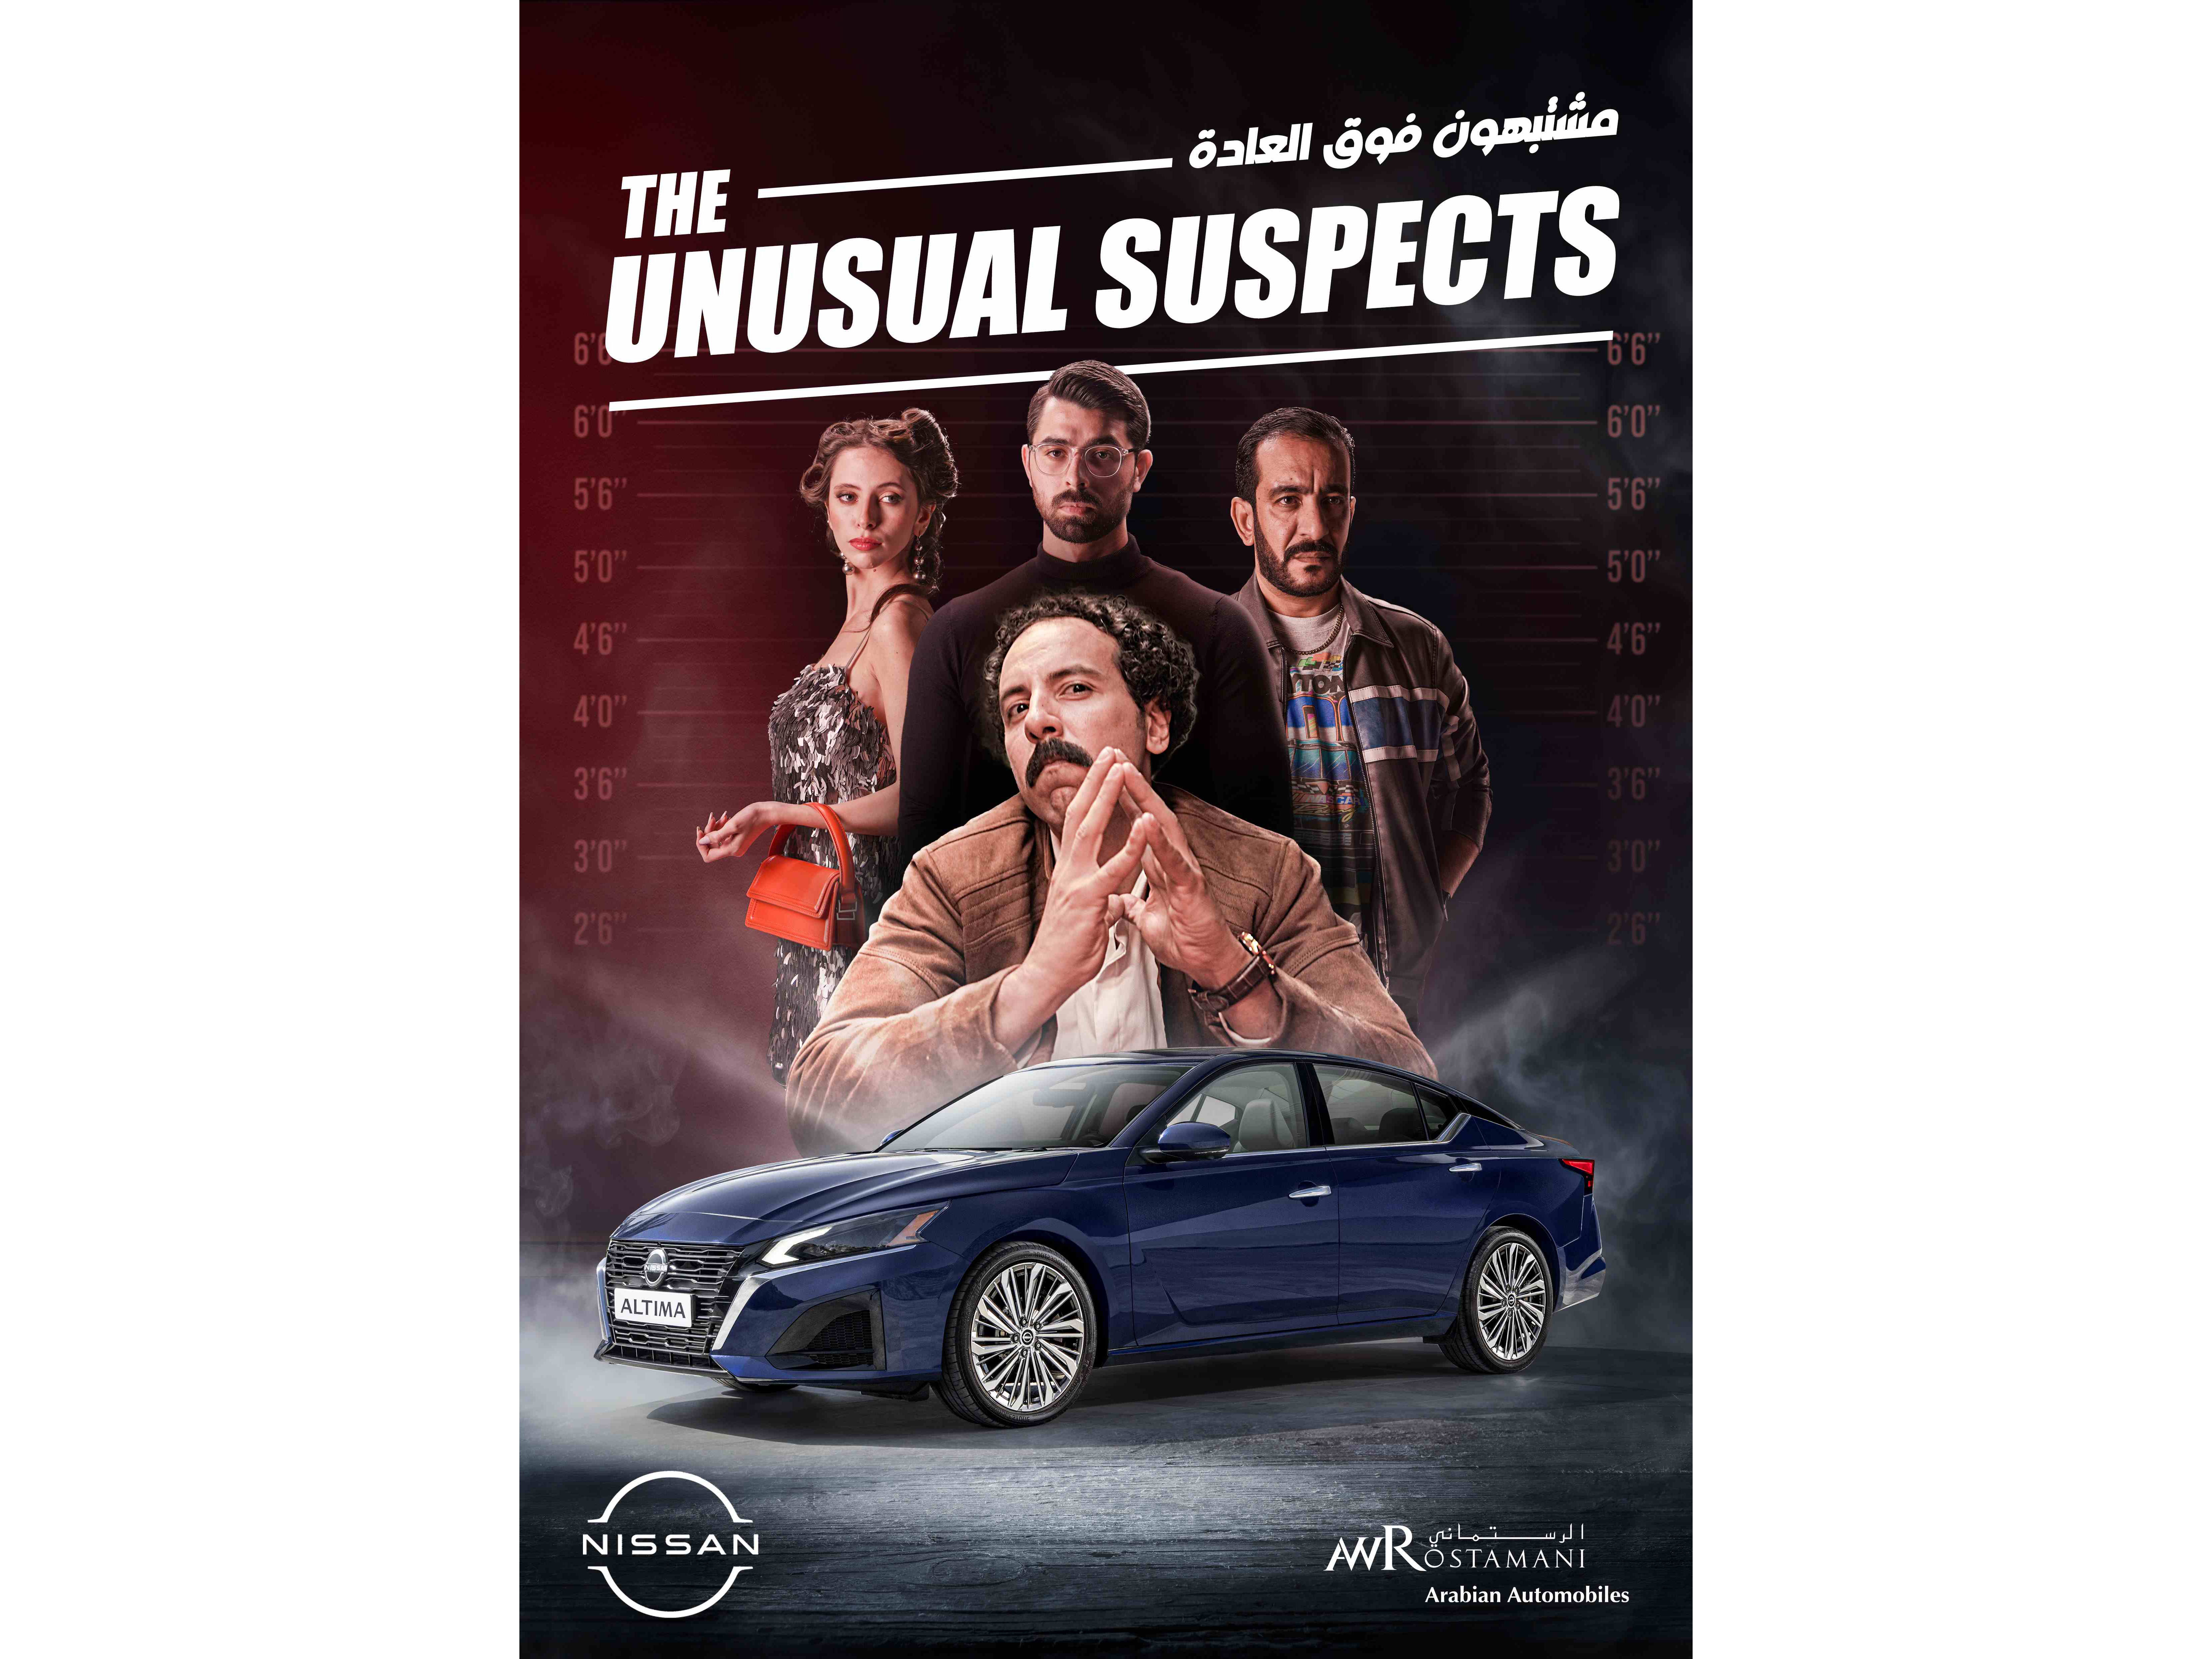 Nissan & TBWA\RAAD deliver an entertaining ride to experience the thrill of ‘The Unusual Suspects’ campaign